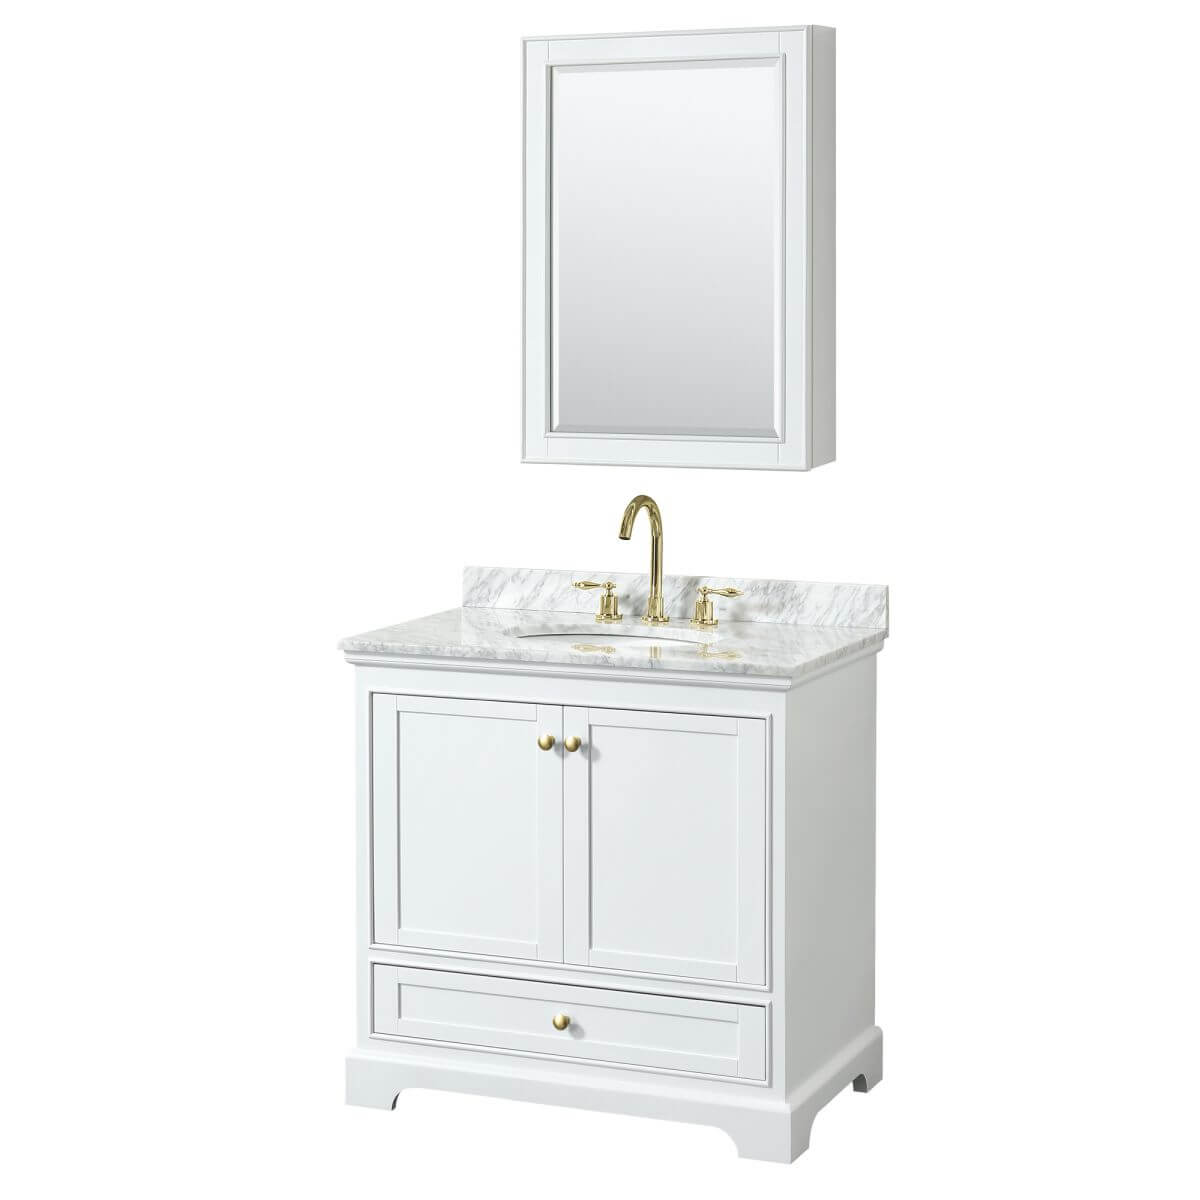 Wyndham Collection Deborah 36 inch Single Bathroom Vanity in White with White Carrara Marble Countertop, Undermount Oval Sink, Brushed Gold Trim and Medicine Cabinet - WCS202036SWGCMUNOMED